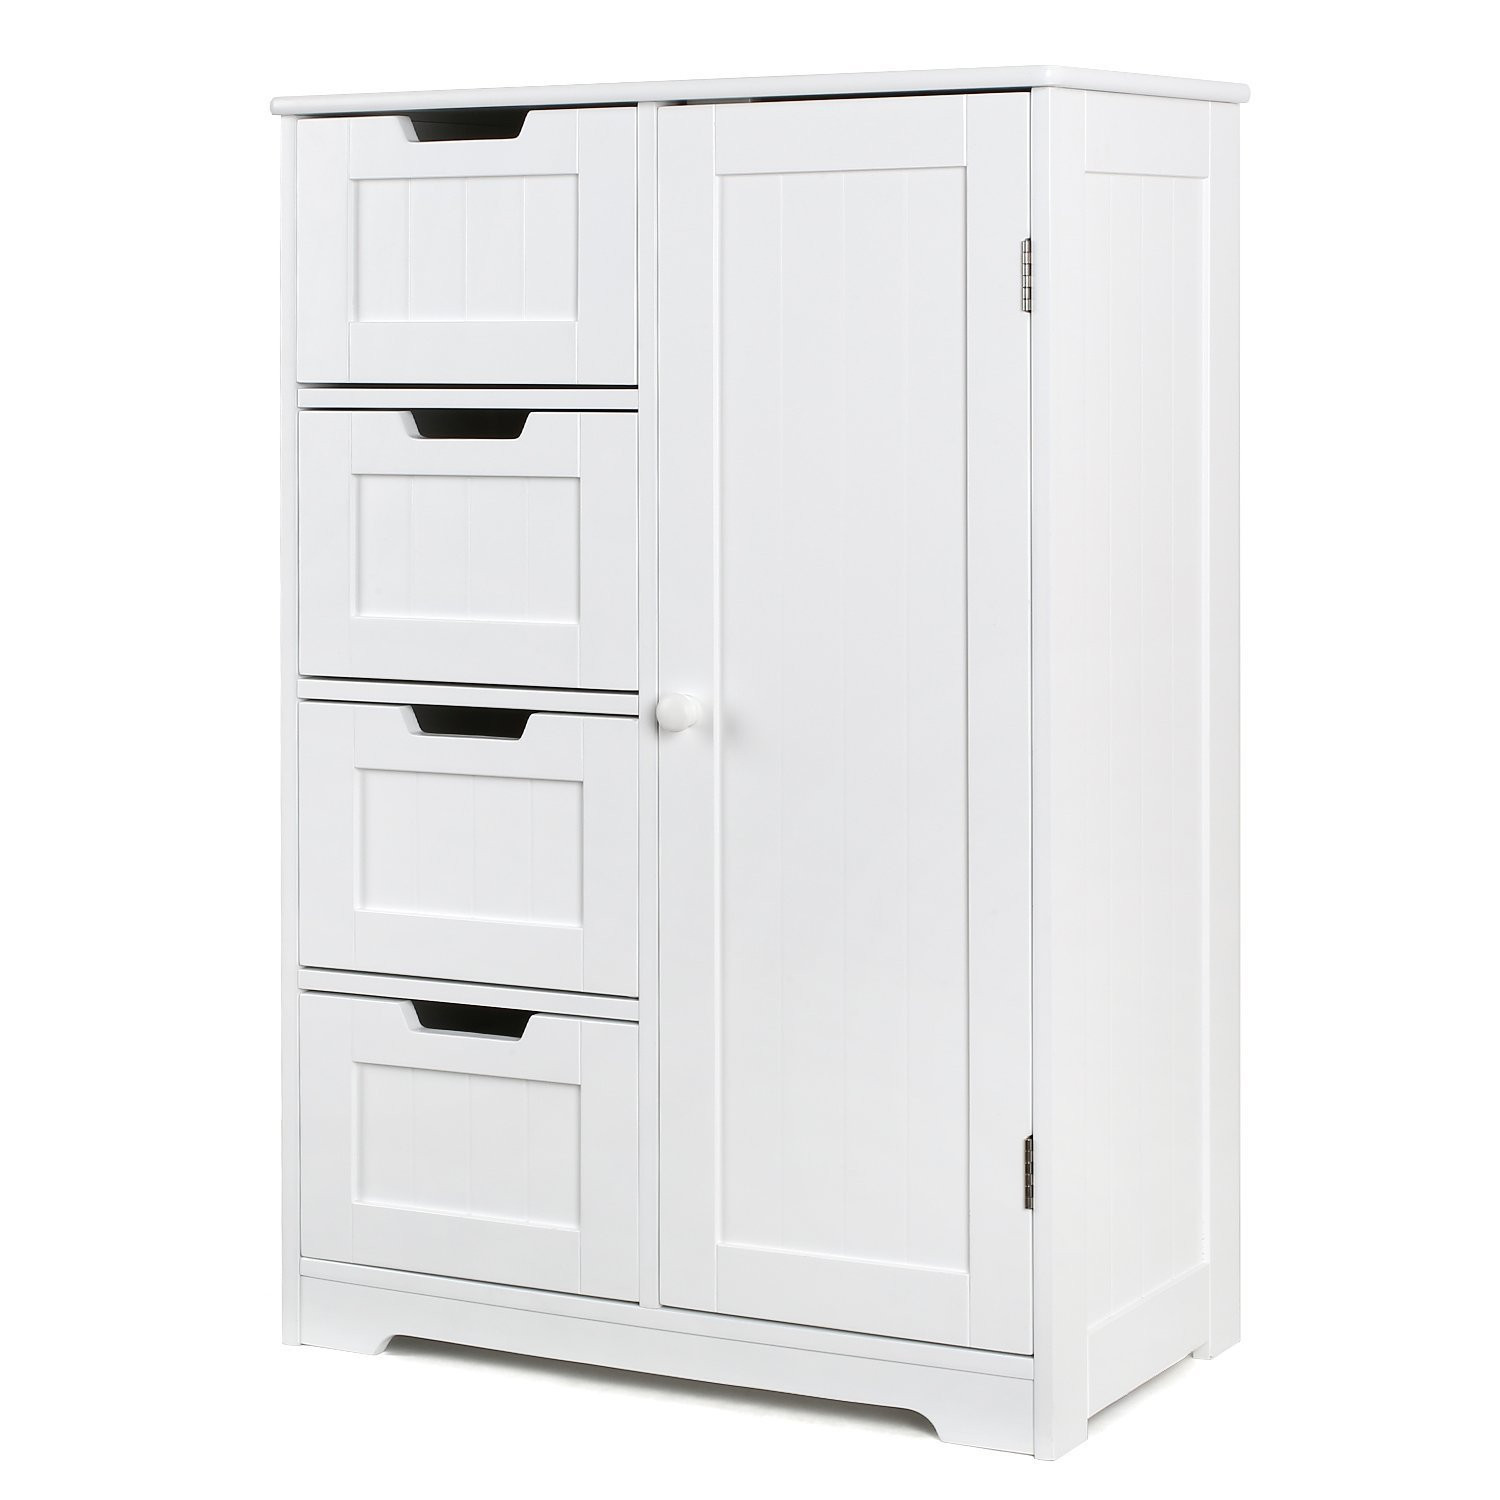 White Bedroom Cabinet
 White Tall Chest Drawers Narrow Tallboy Cabinet Bedroom